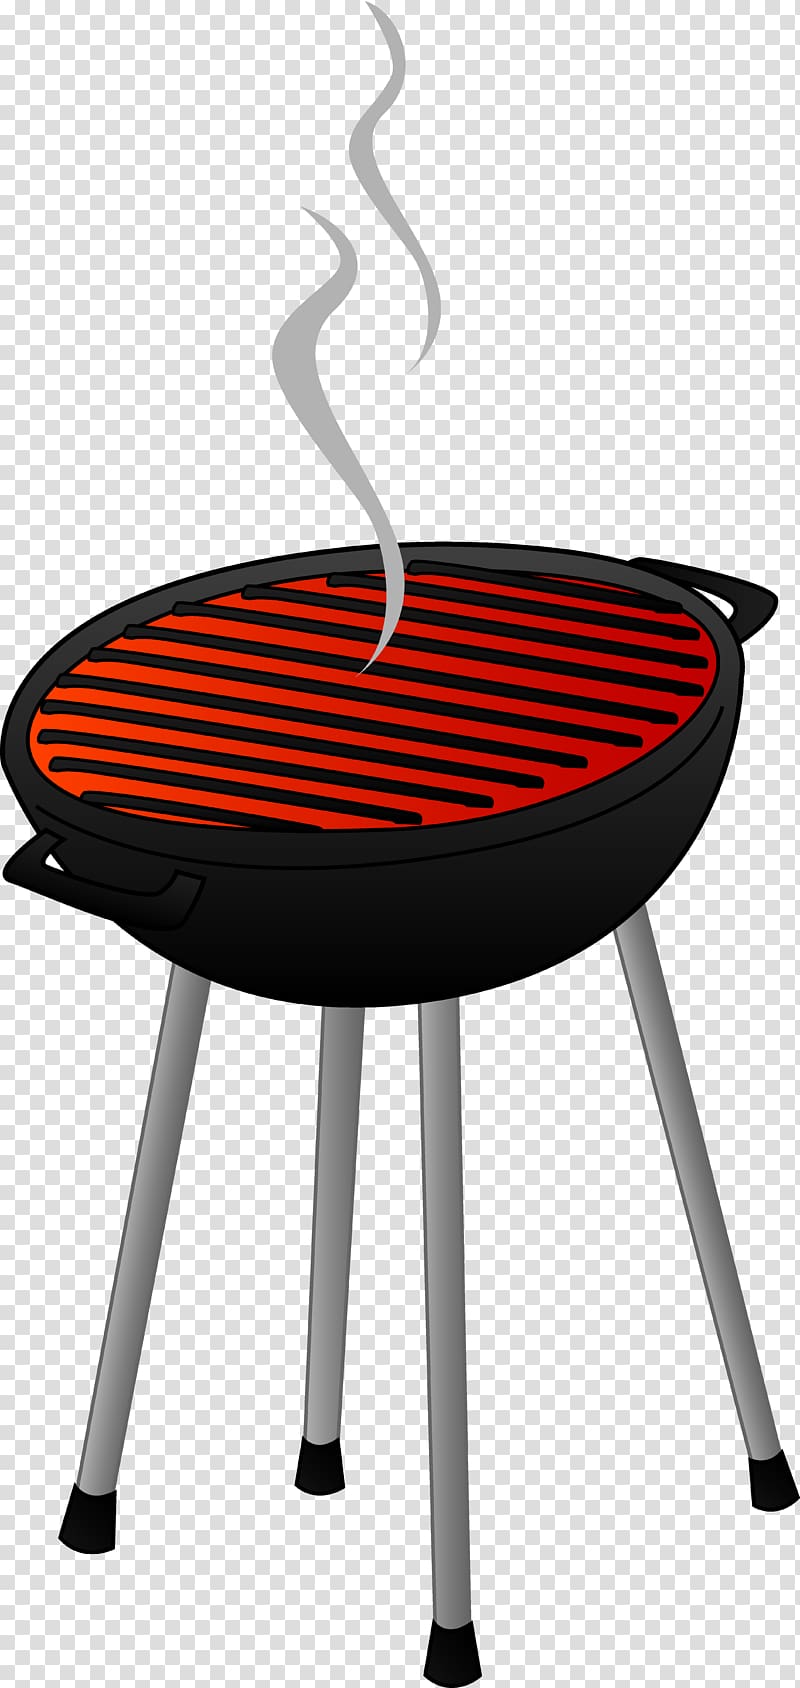 cookout clipart grill smoke